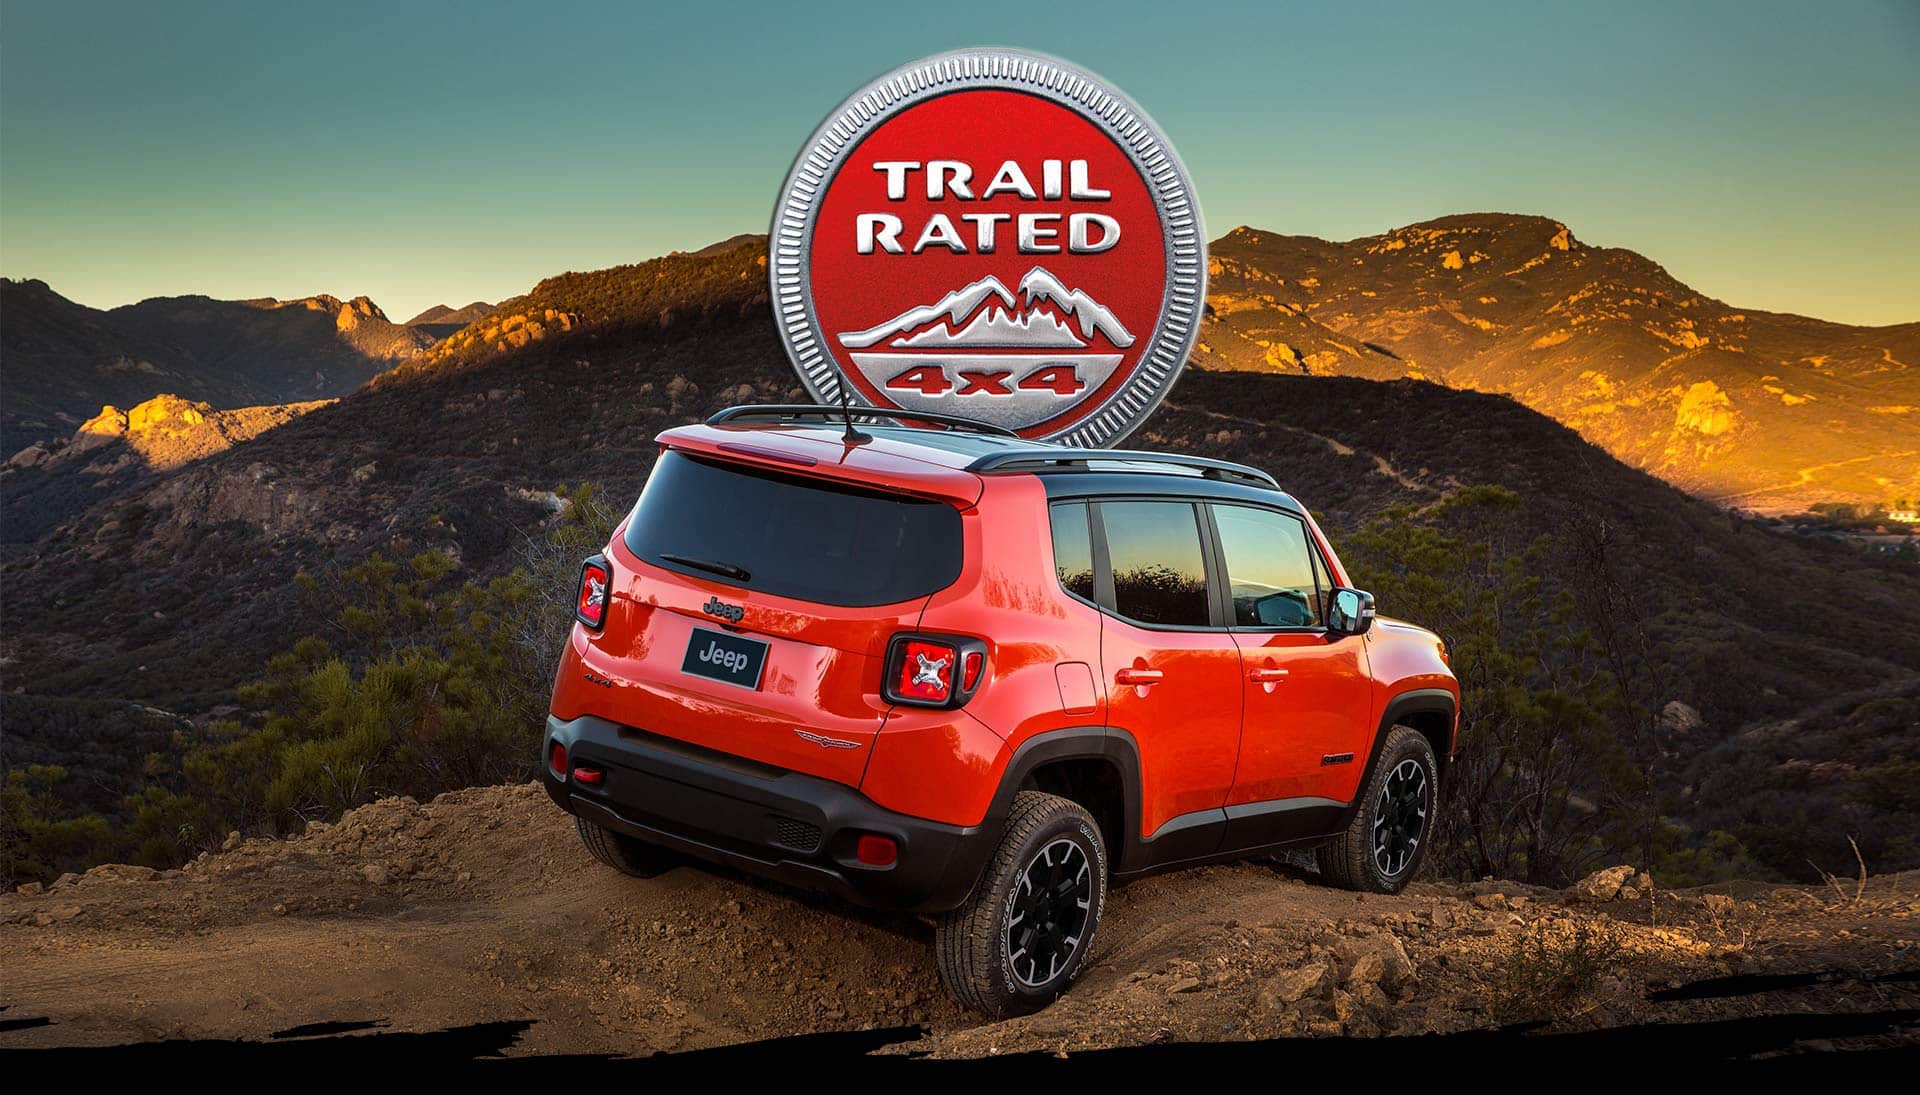 Trail Rated 4x4. The rear view of a red 2023 Jeep Renegade Trailhawk being driven on a dirt trail in the mountains.